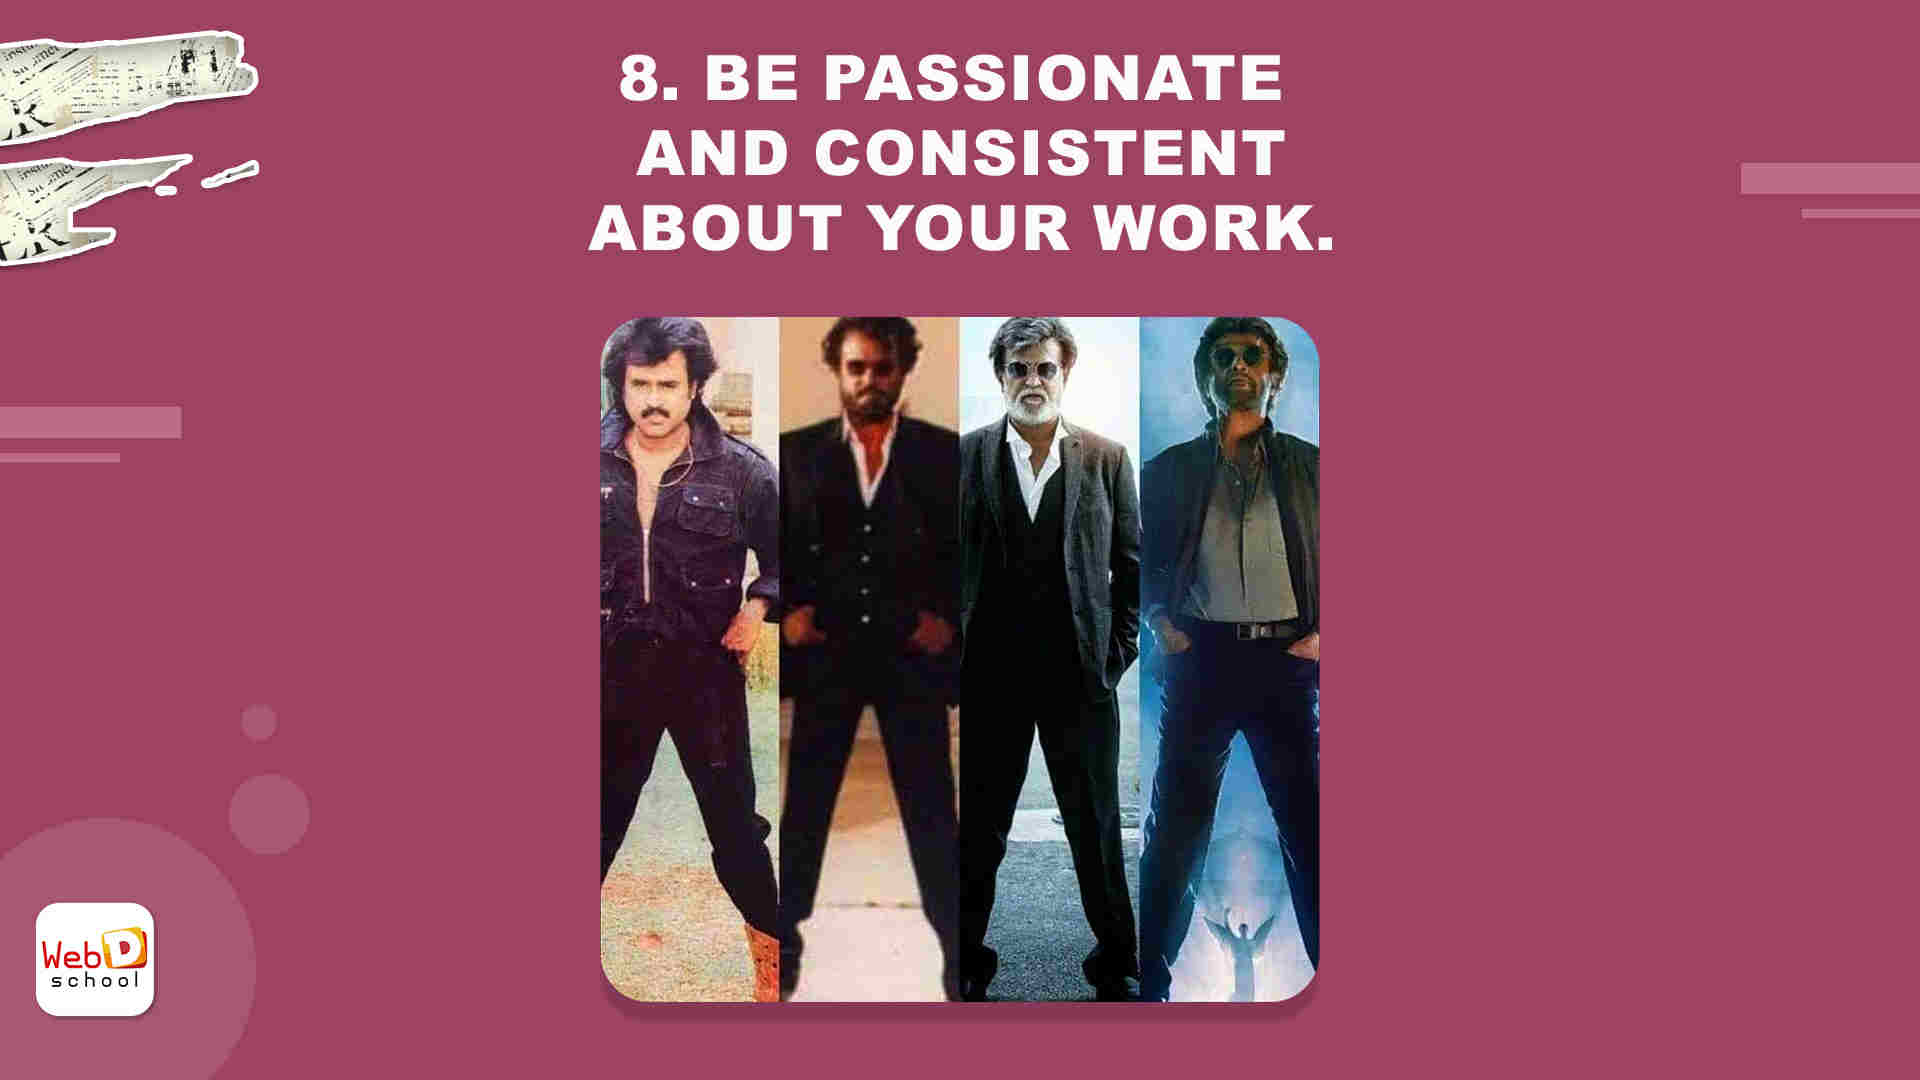 Be passionate and consistent about your work.